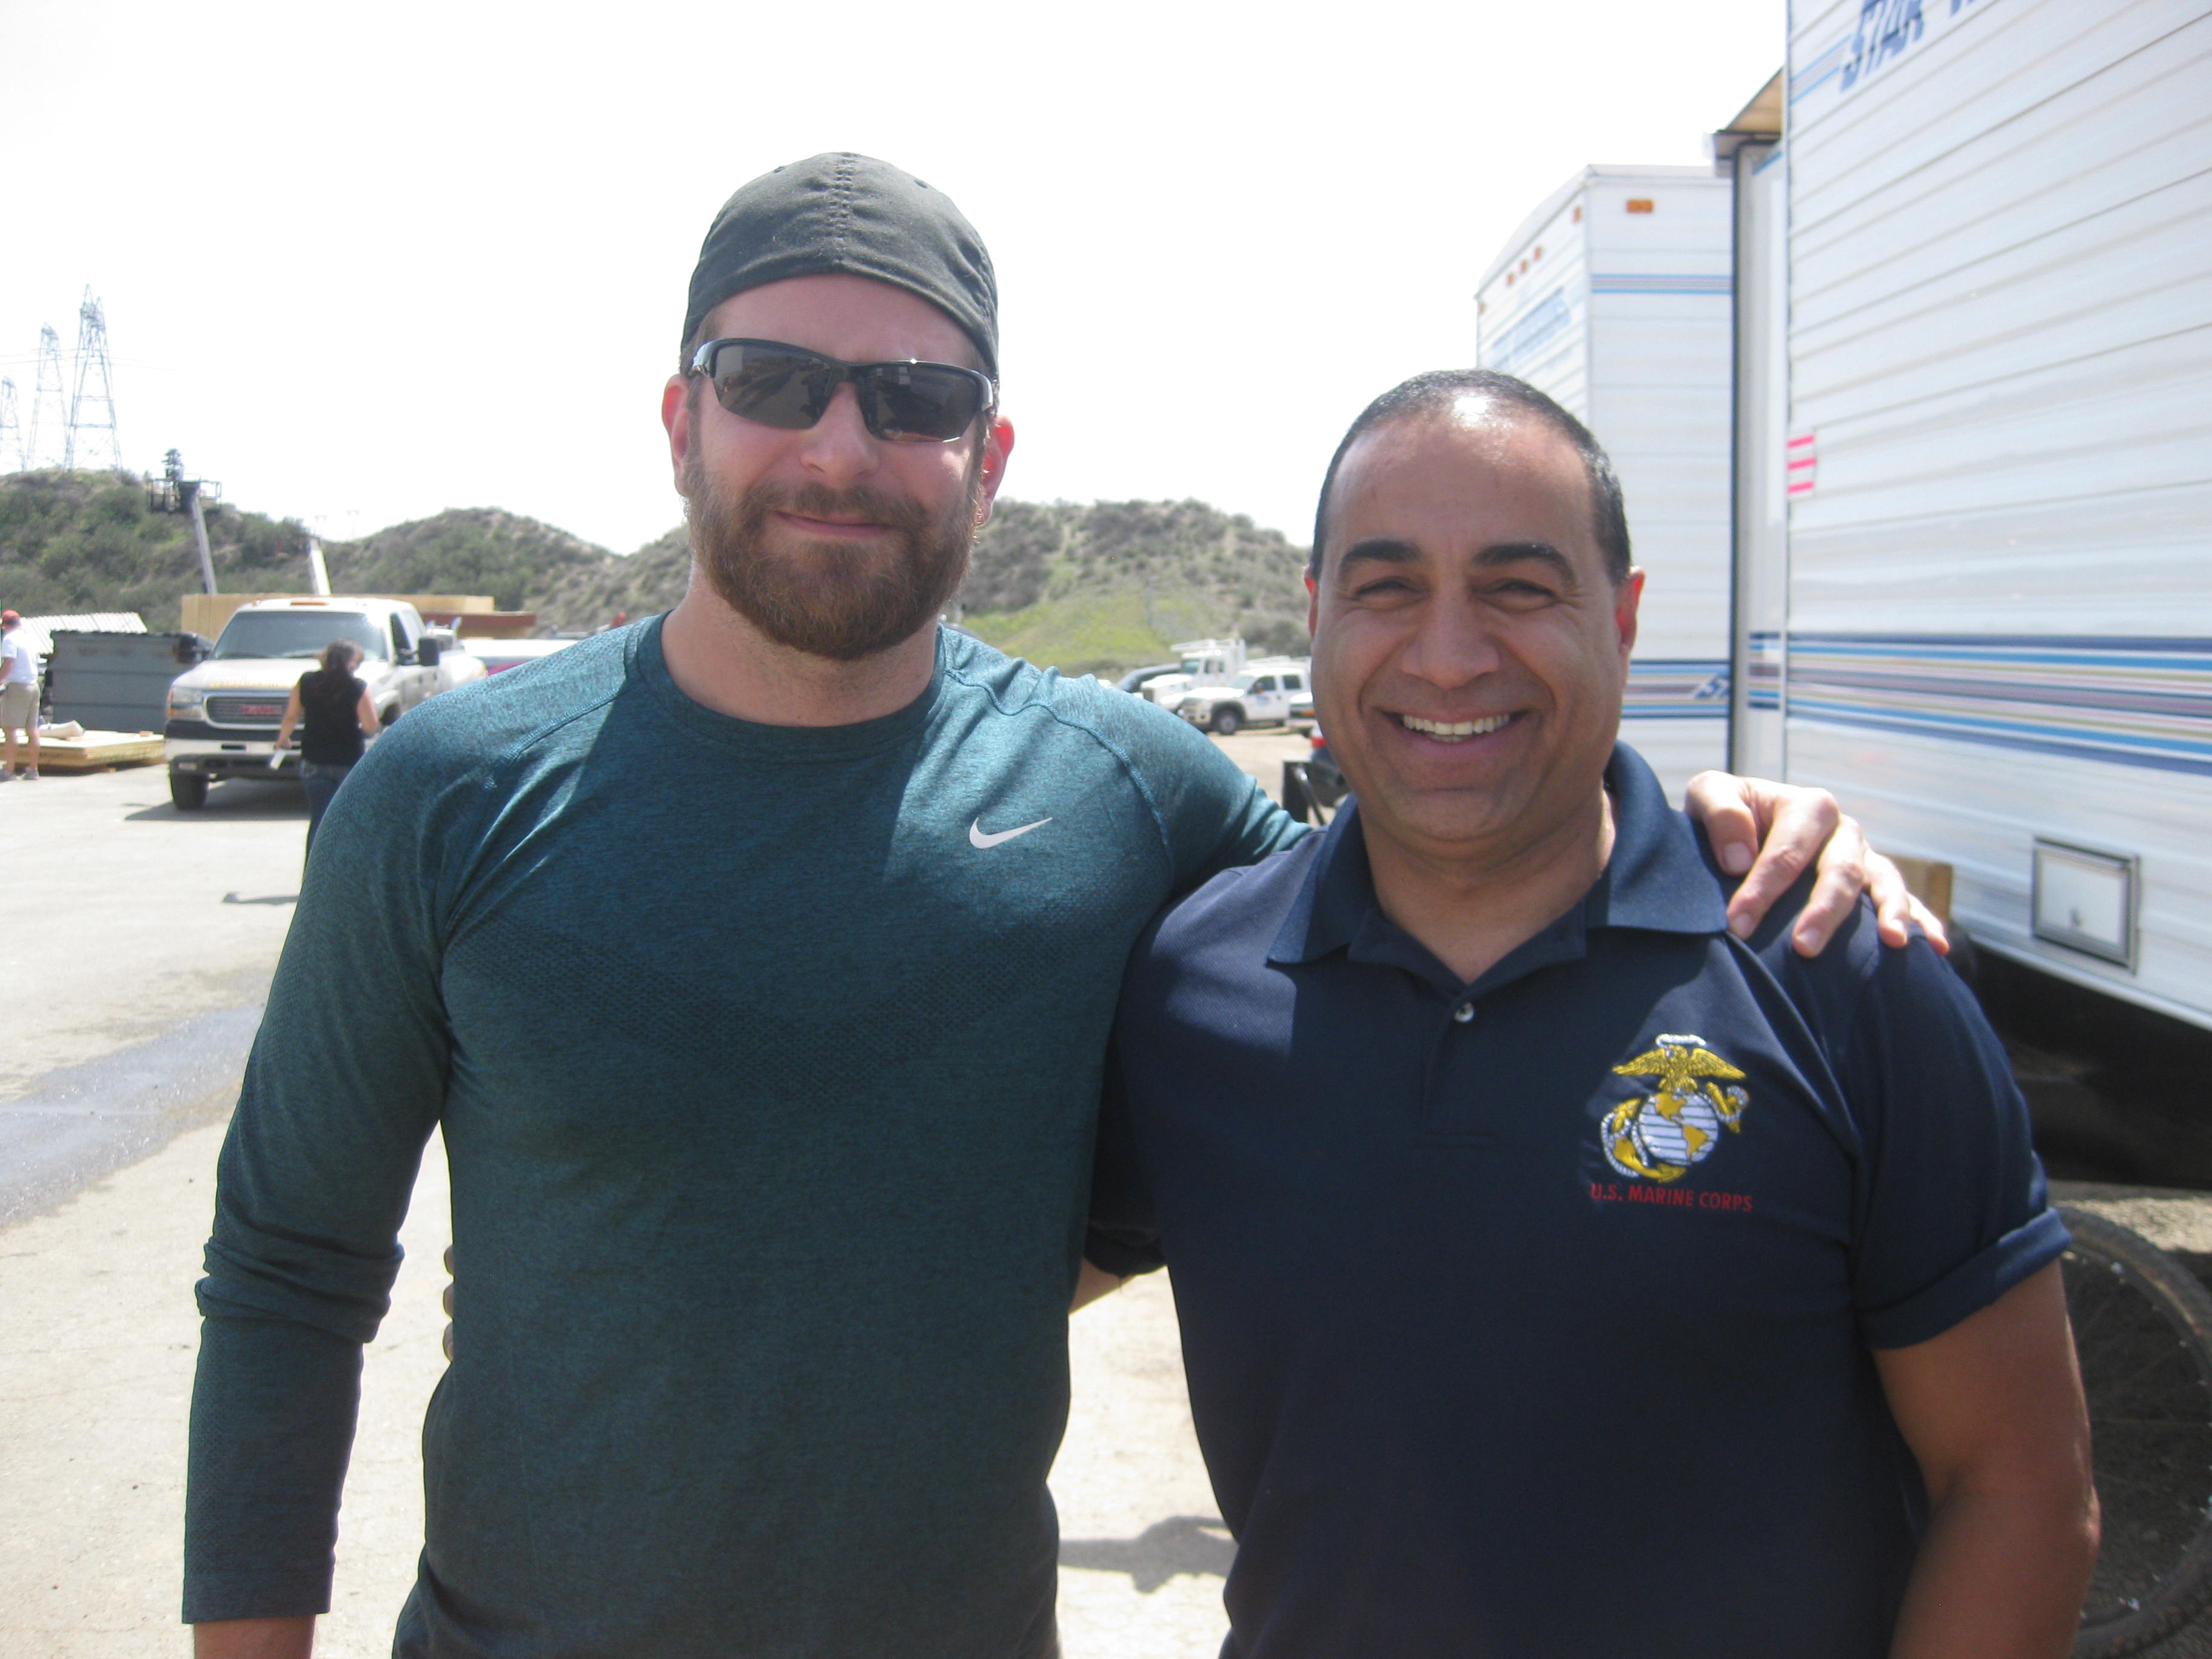 the Actor Bradly Copper and me shooting American Sniper movie